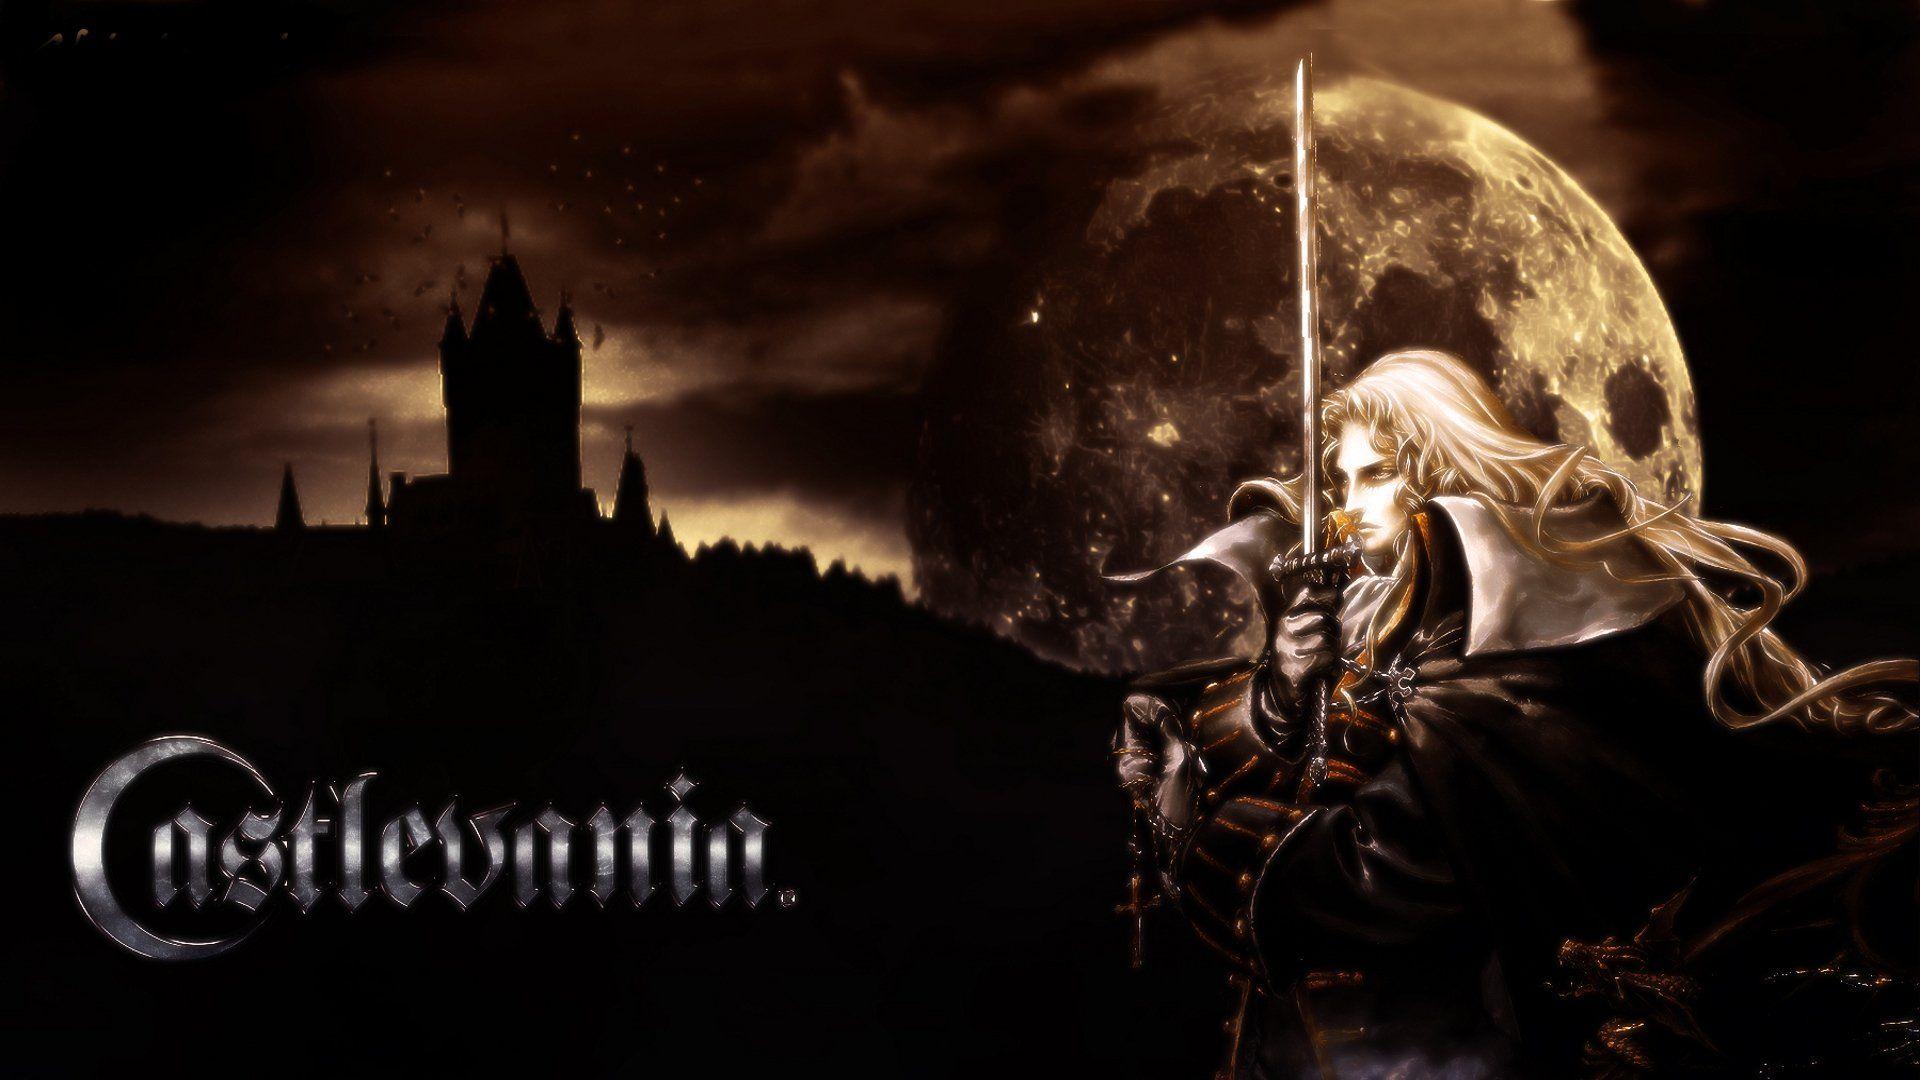 Castlevania: Symphony of the Night HD Wallpaper. Background Image